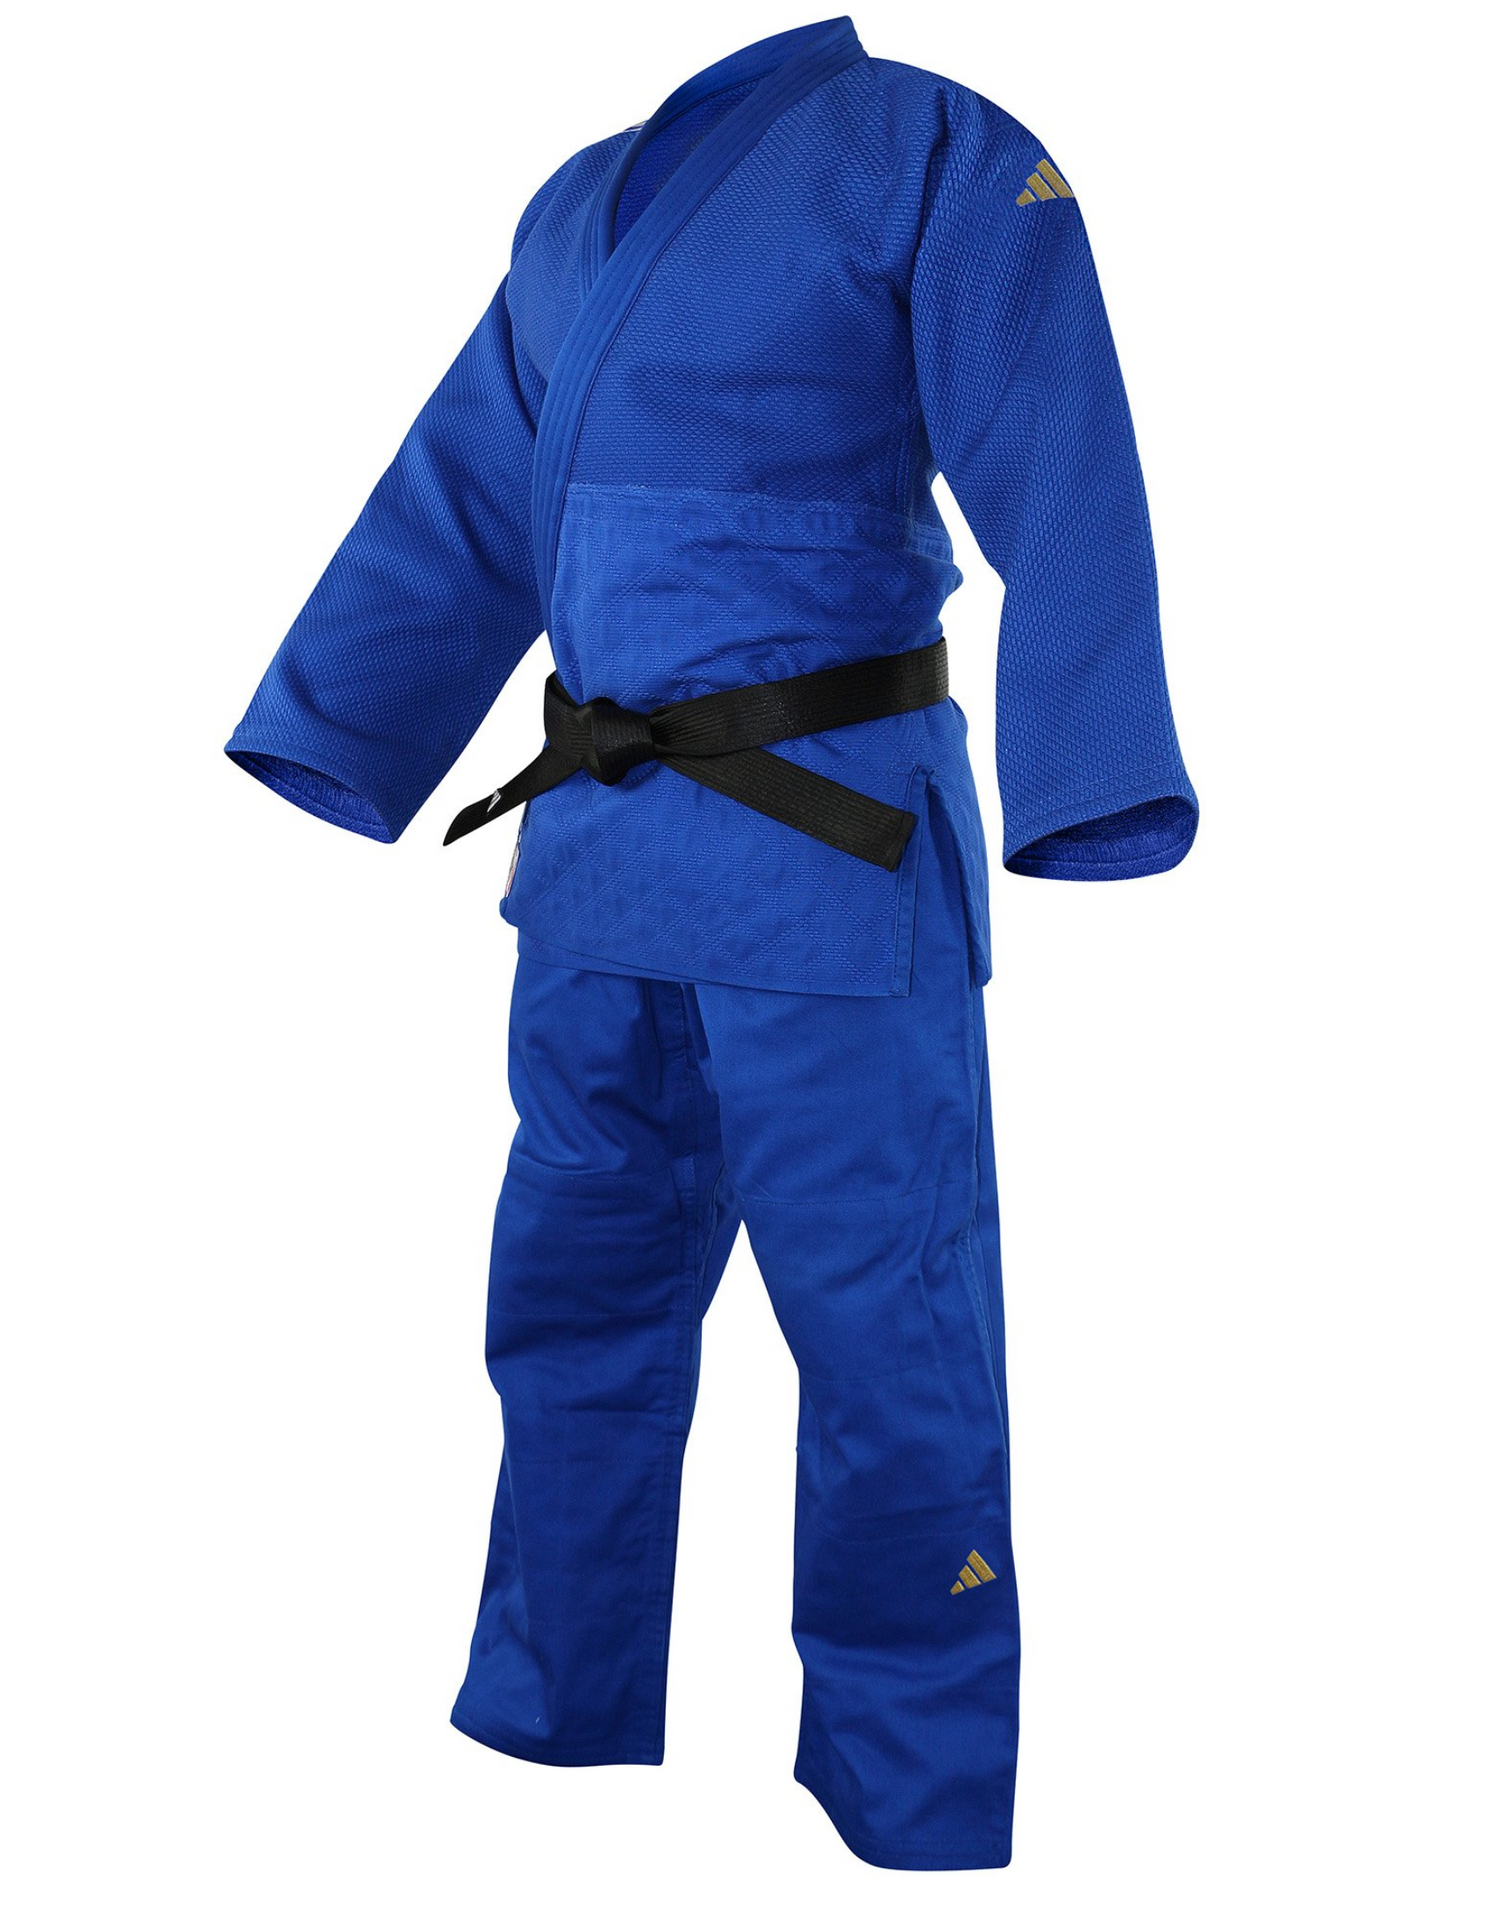 Adidas IJF Champion 3 Slim Fit Blue for 2023 with Gold Logo